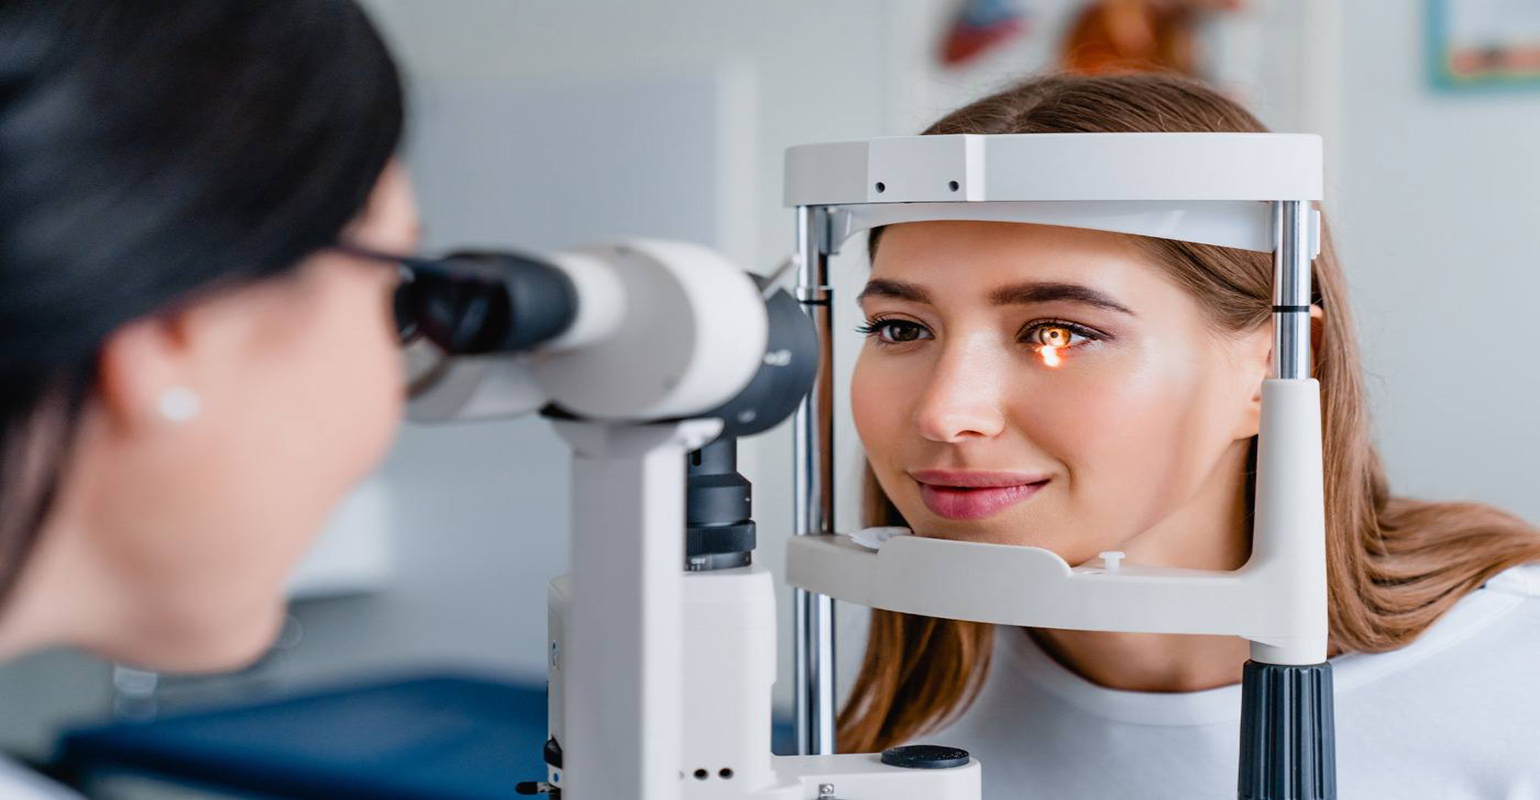 Breakthroughs in ophthalmology | Omnia Health Insights